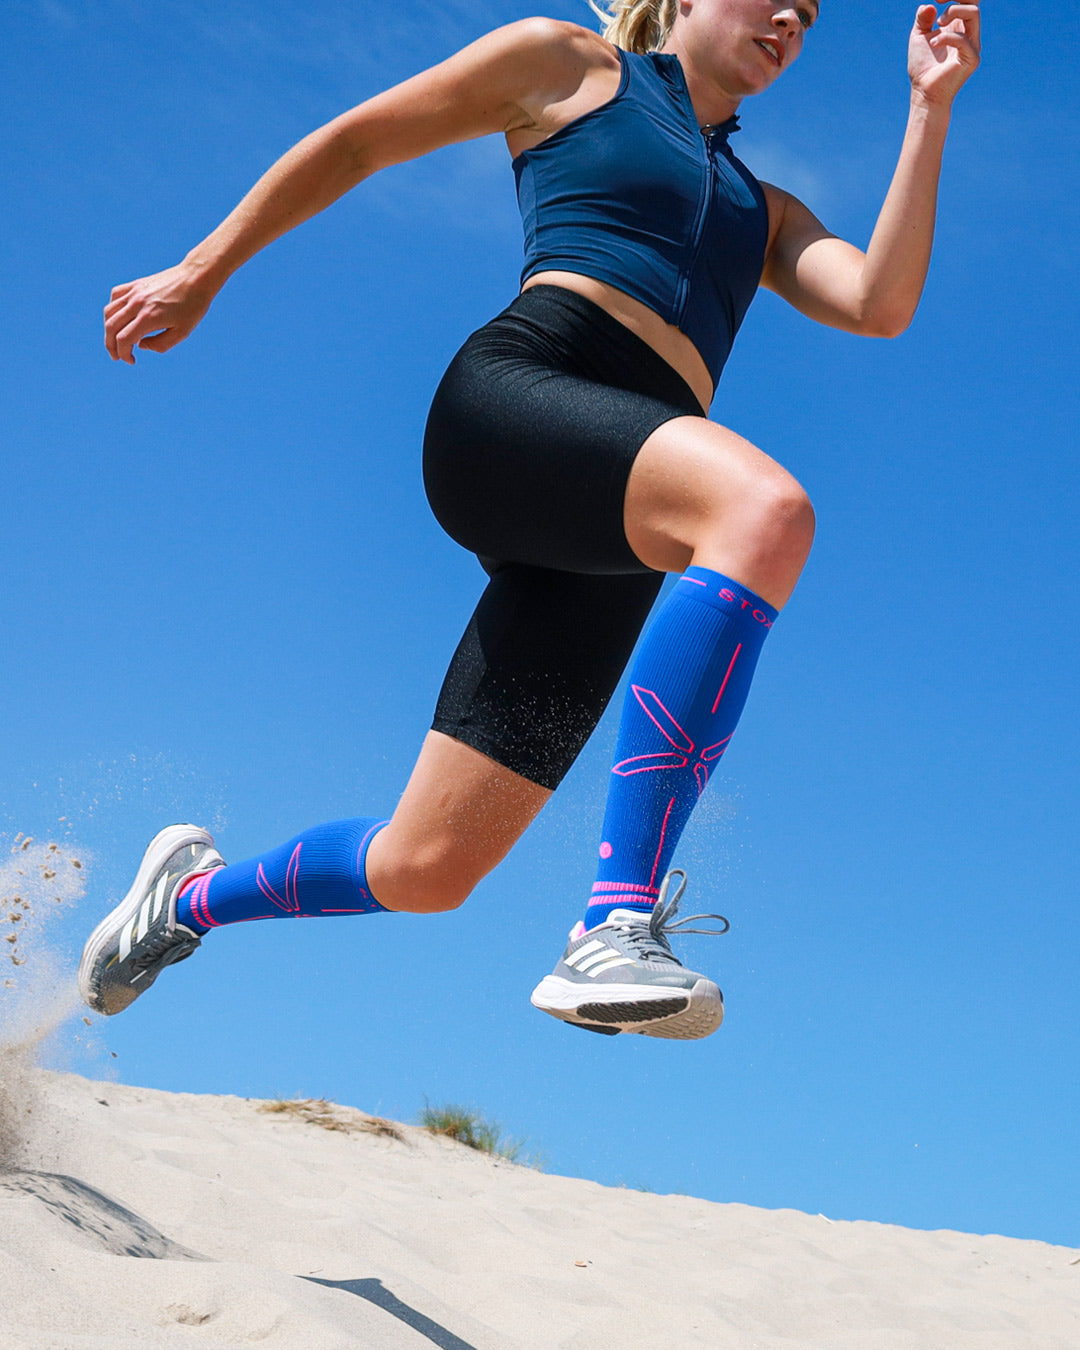 Sprinting woman on sand with compression socks.